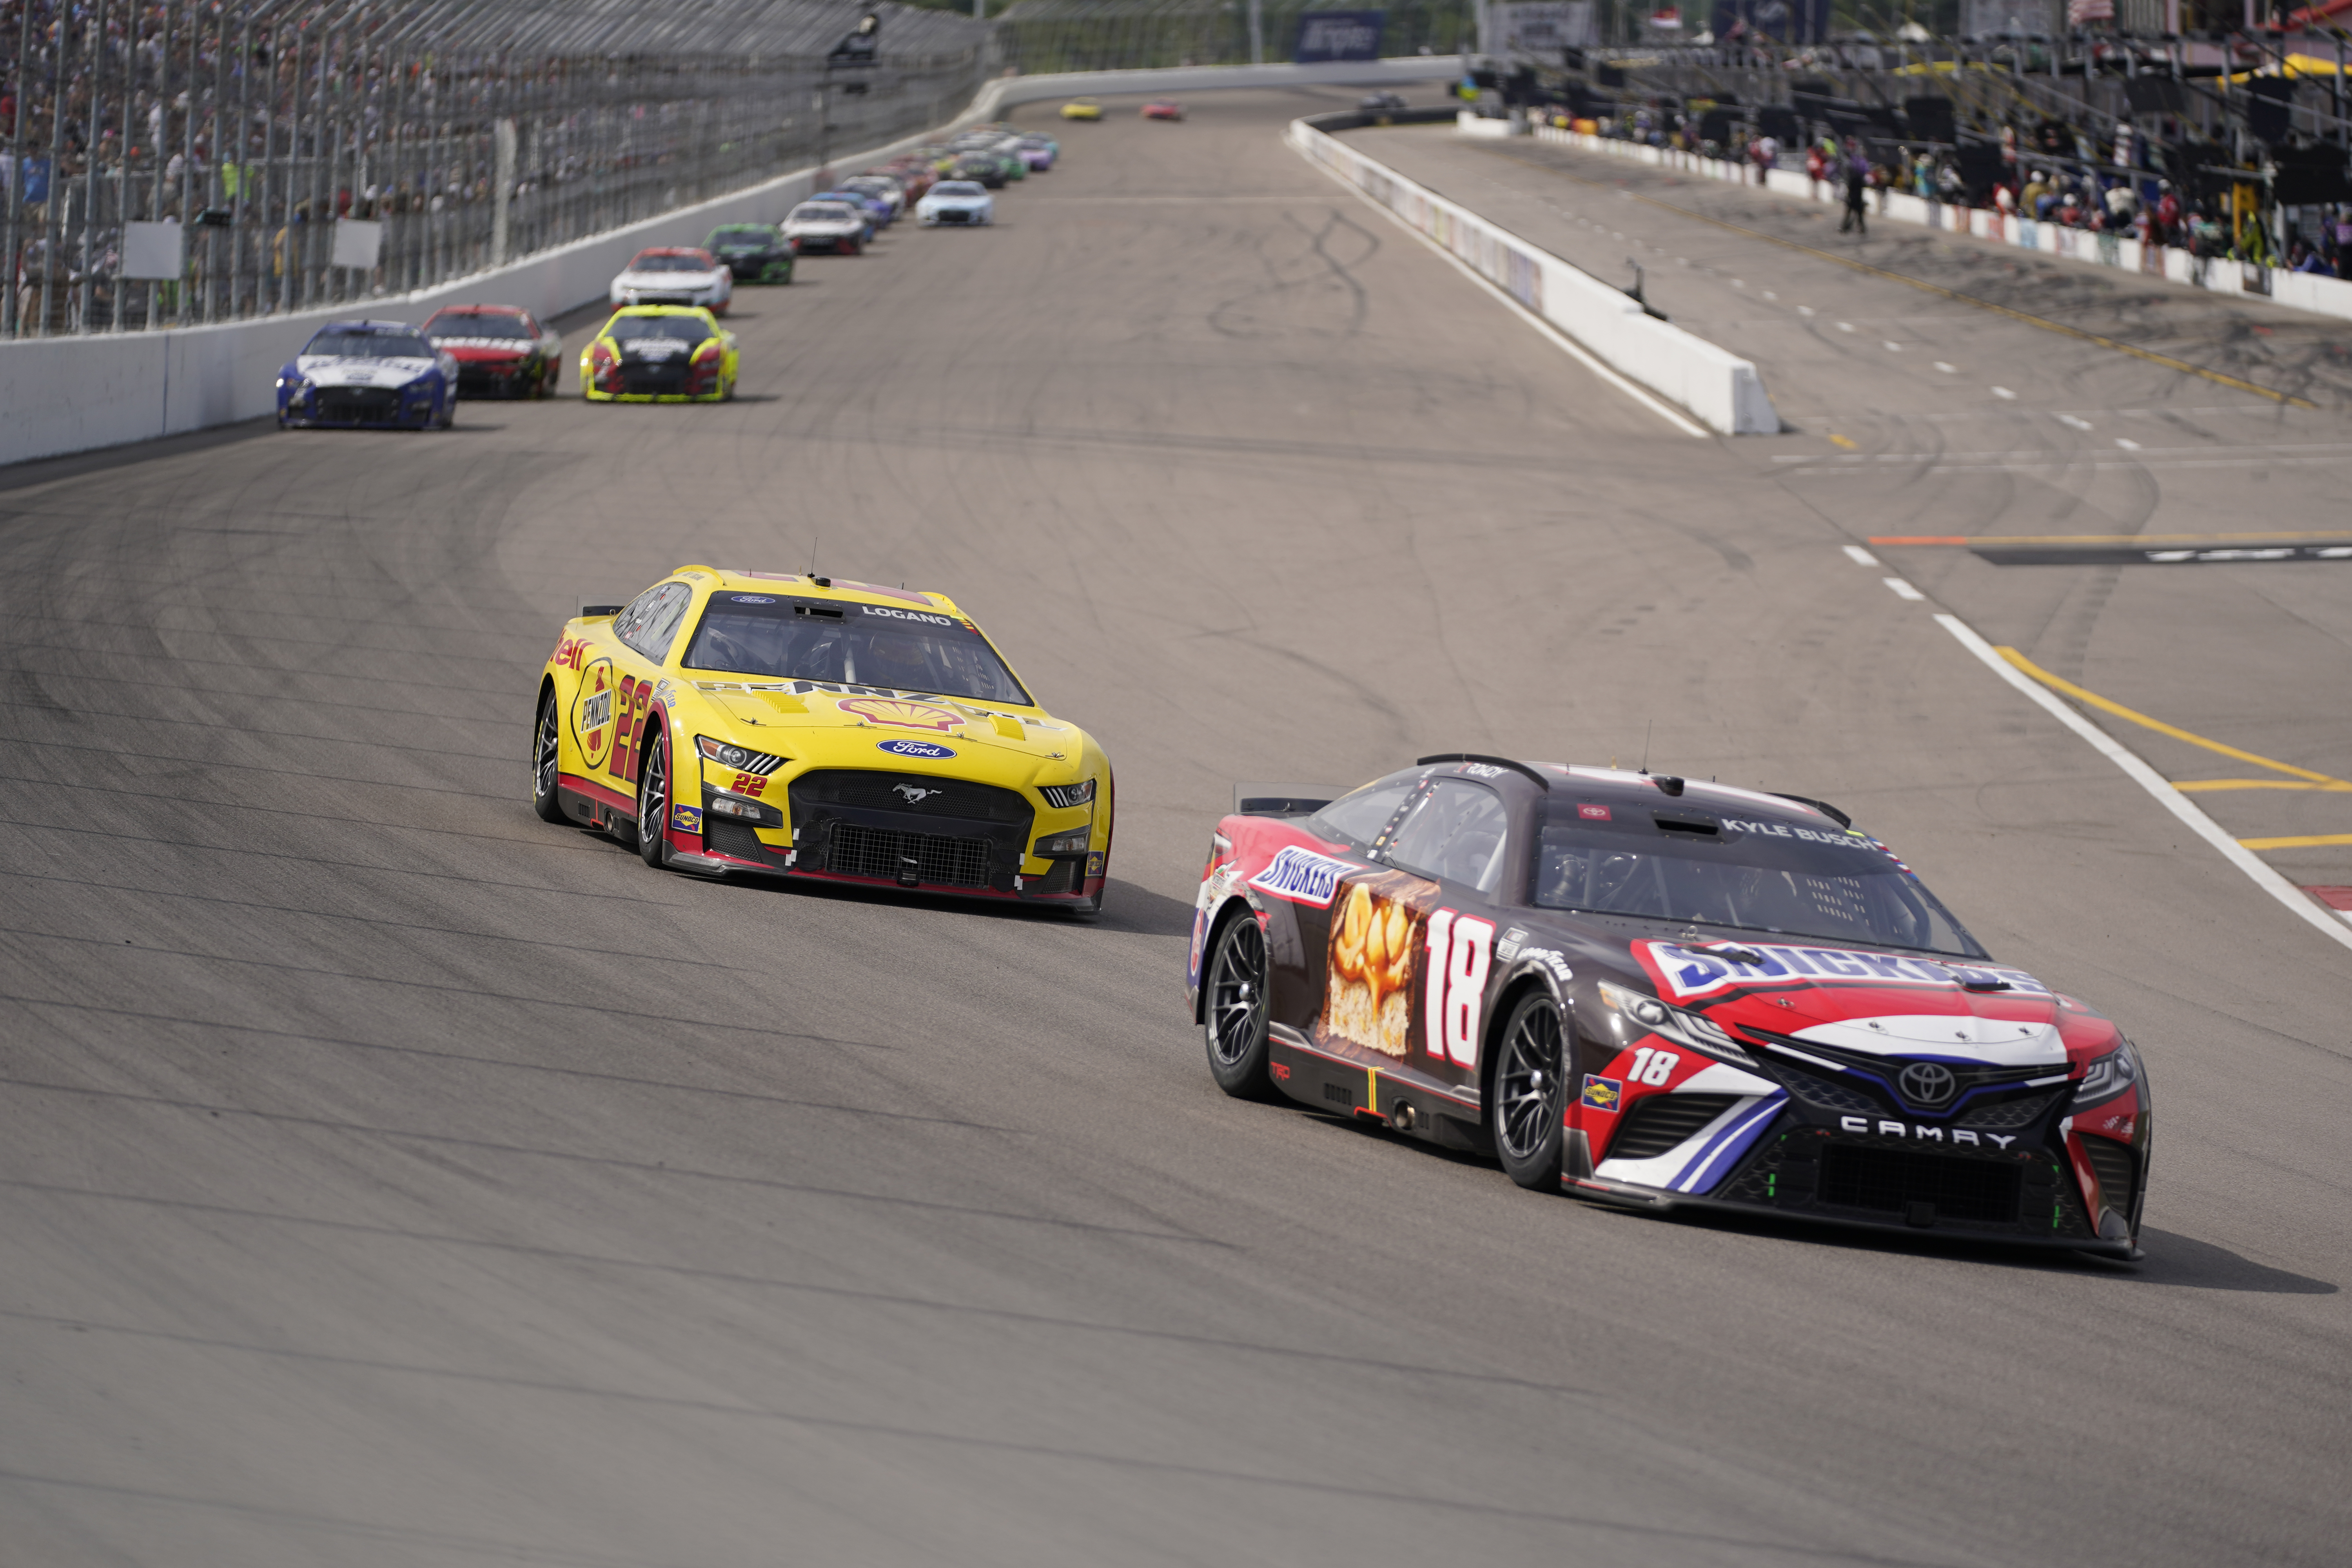 NASCAR Quaker State 400 FREE LIVE STREAM (6/12/22) Watch NASCAR Cup Series online Time, TV, channel